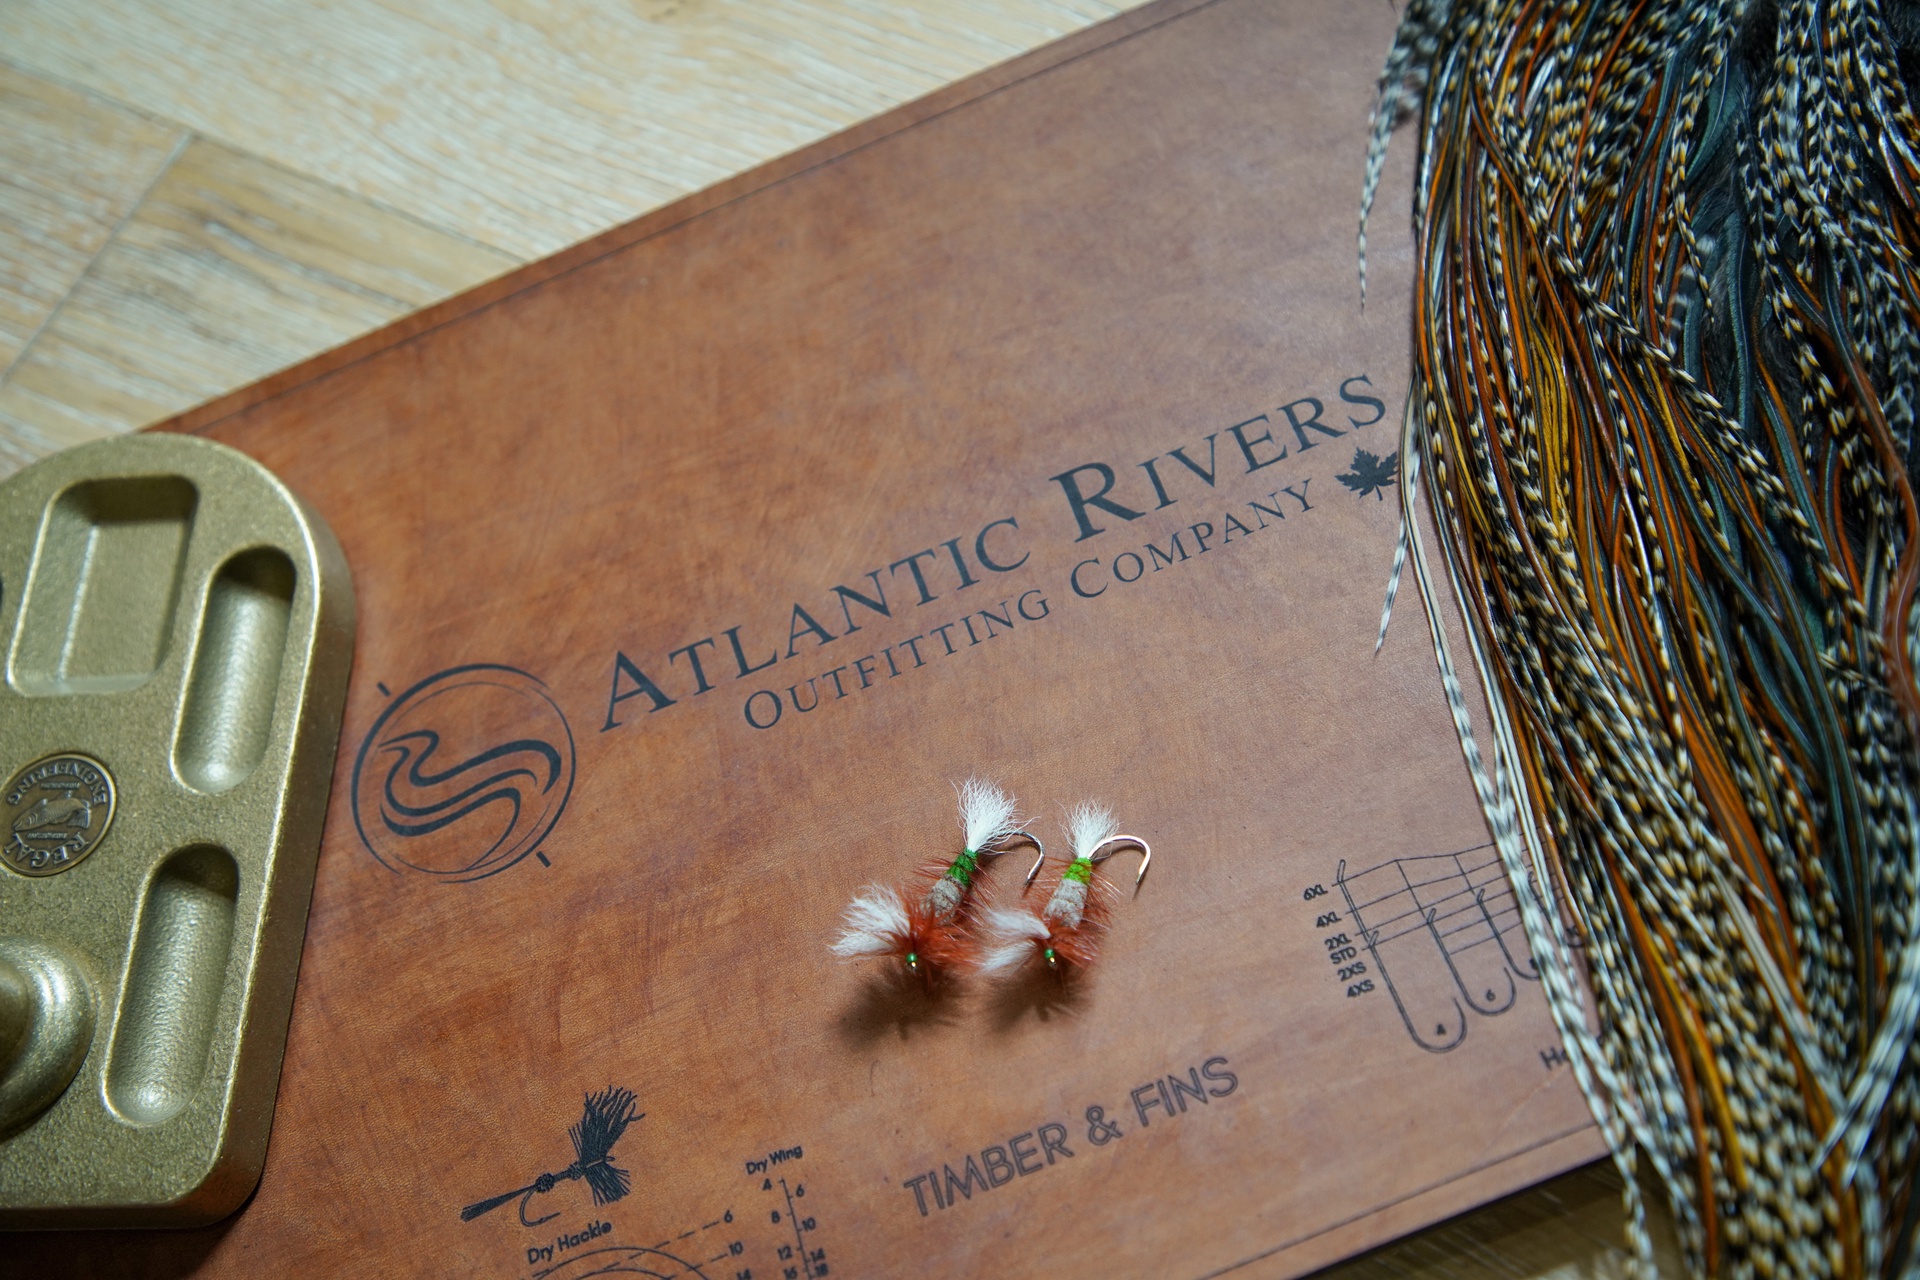 Timber & Fins x AROC Fly Tying mat - Atlantic Rivers Outfitting Company